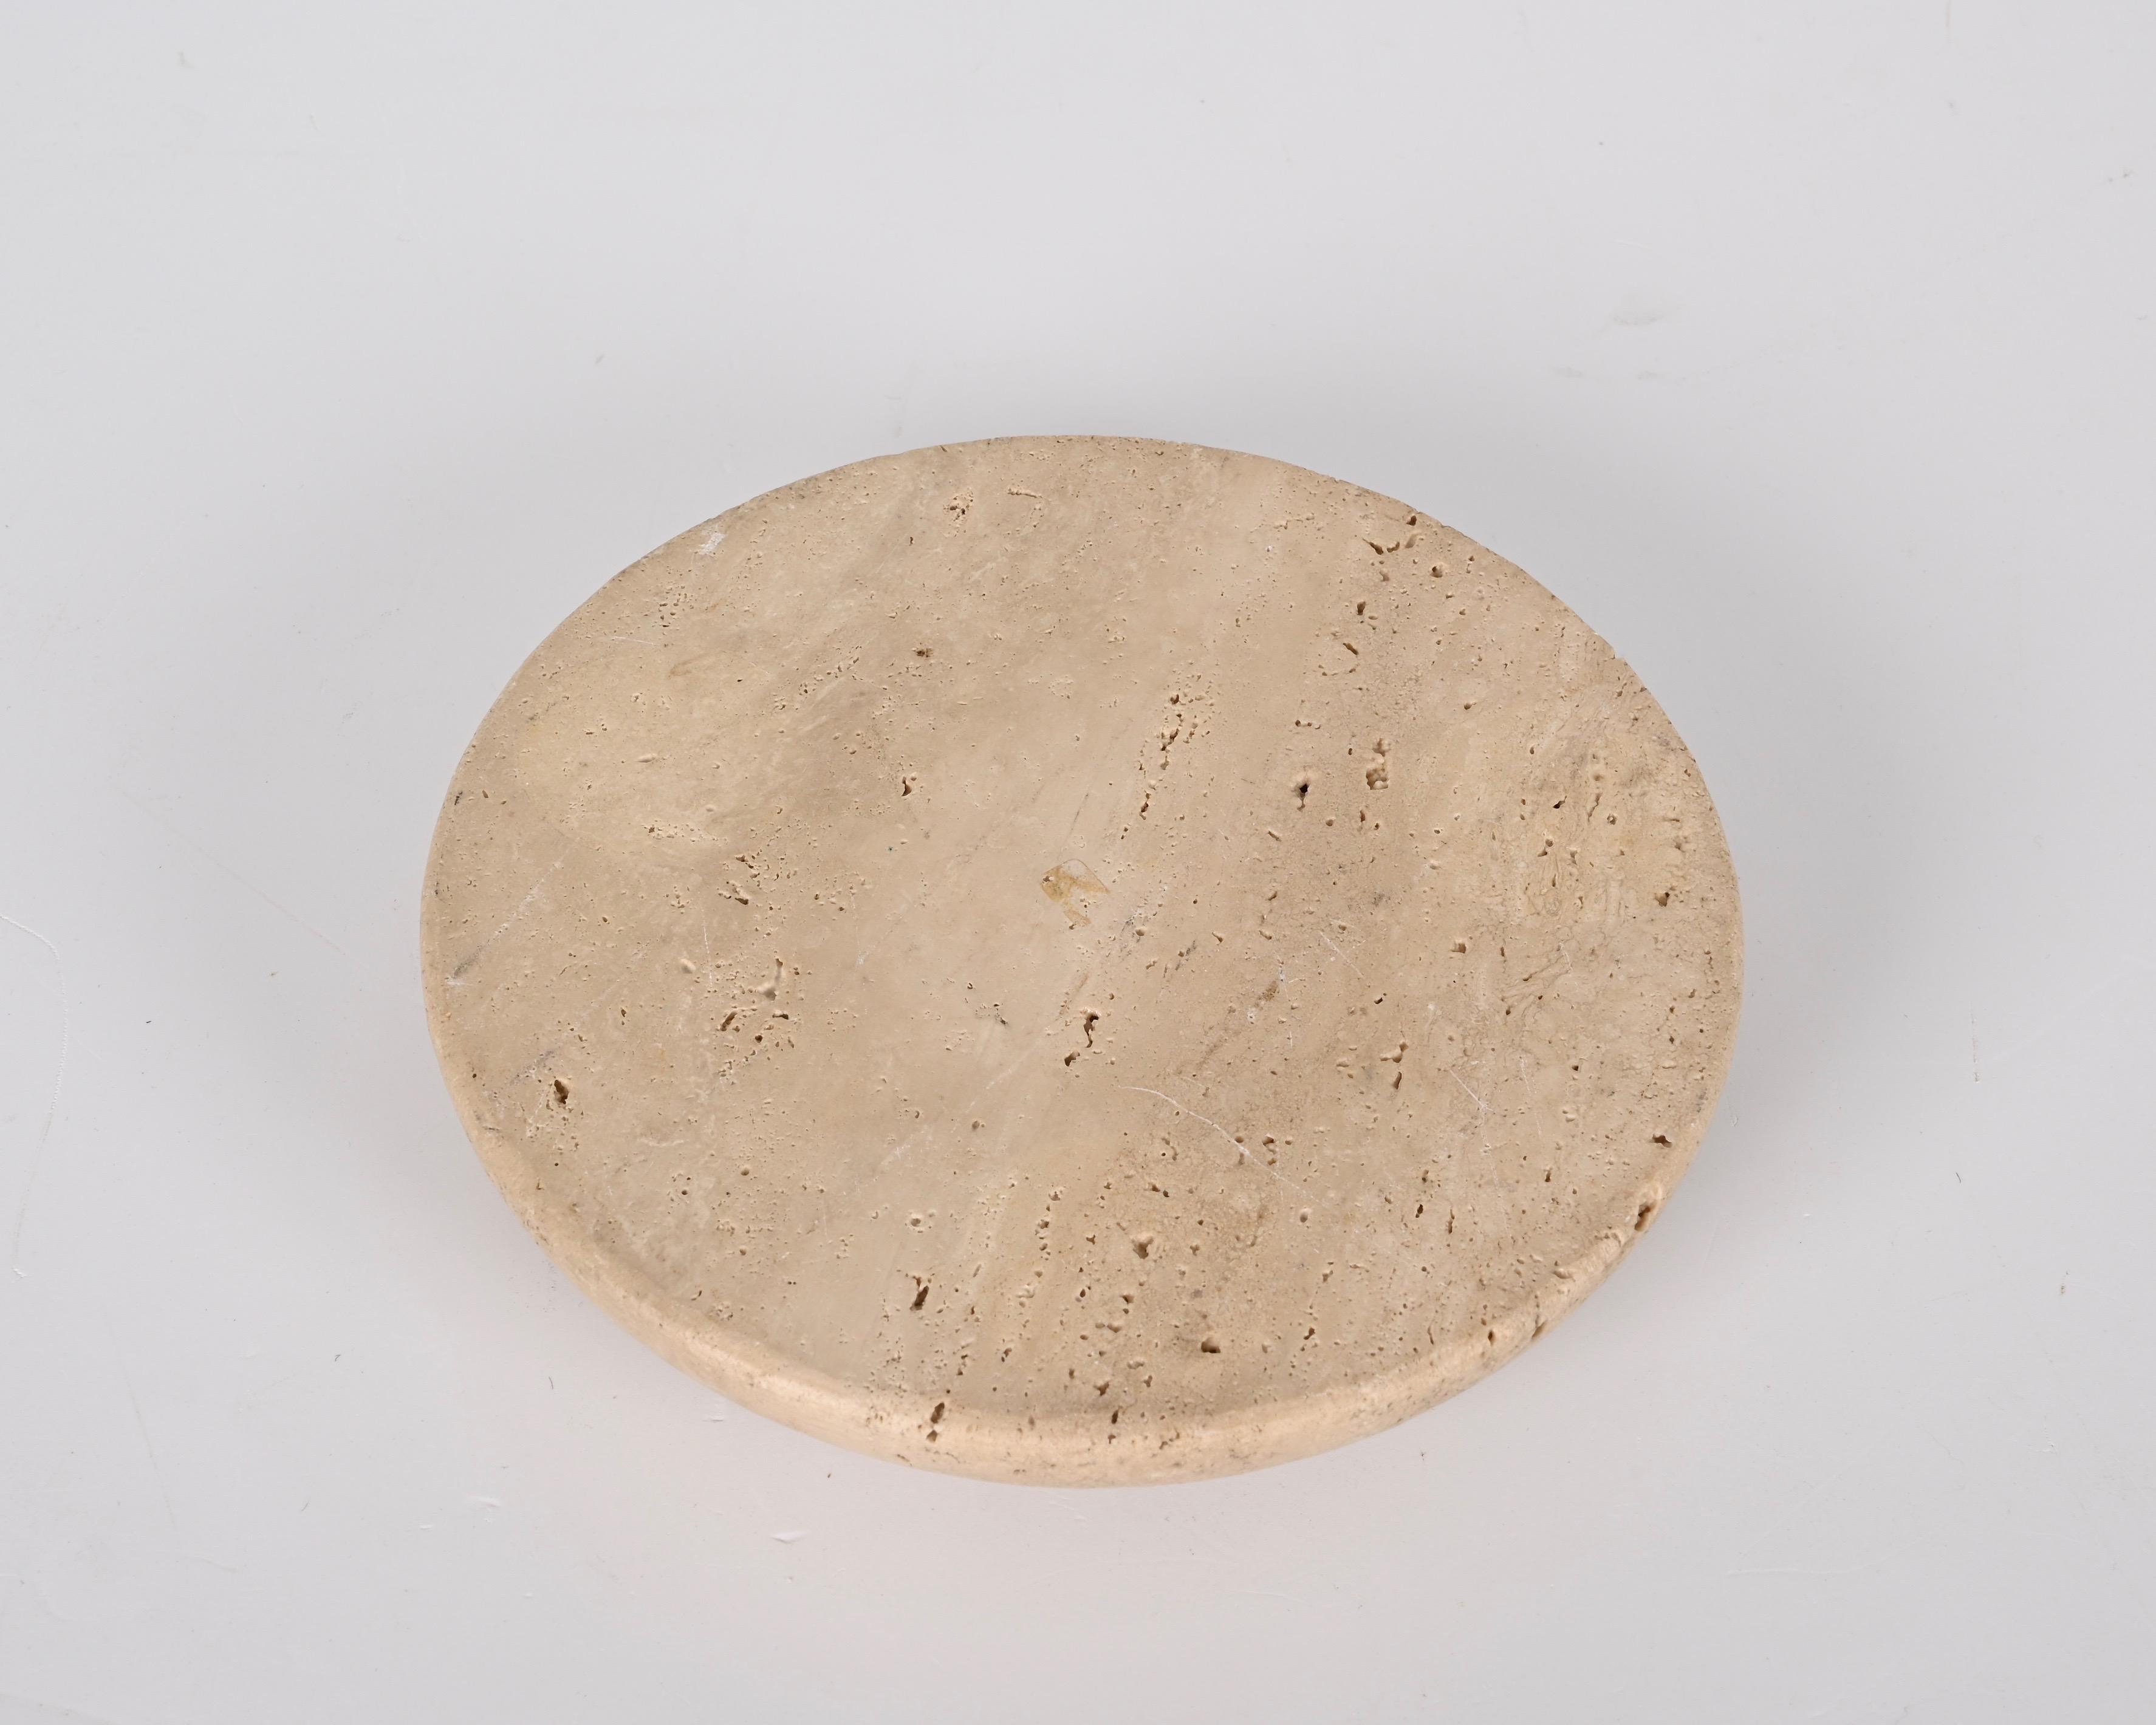 Midcentury Round Ashtray White Travertine Marble and Steel, Mannelli Italy 1970s For Sale 7